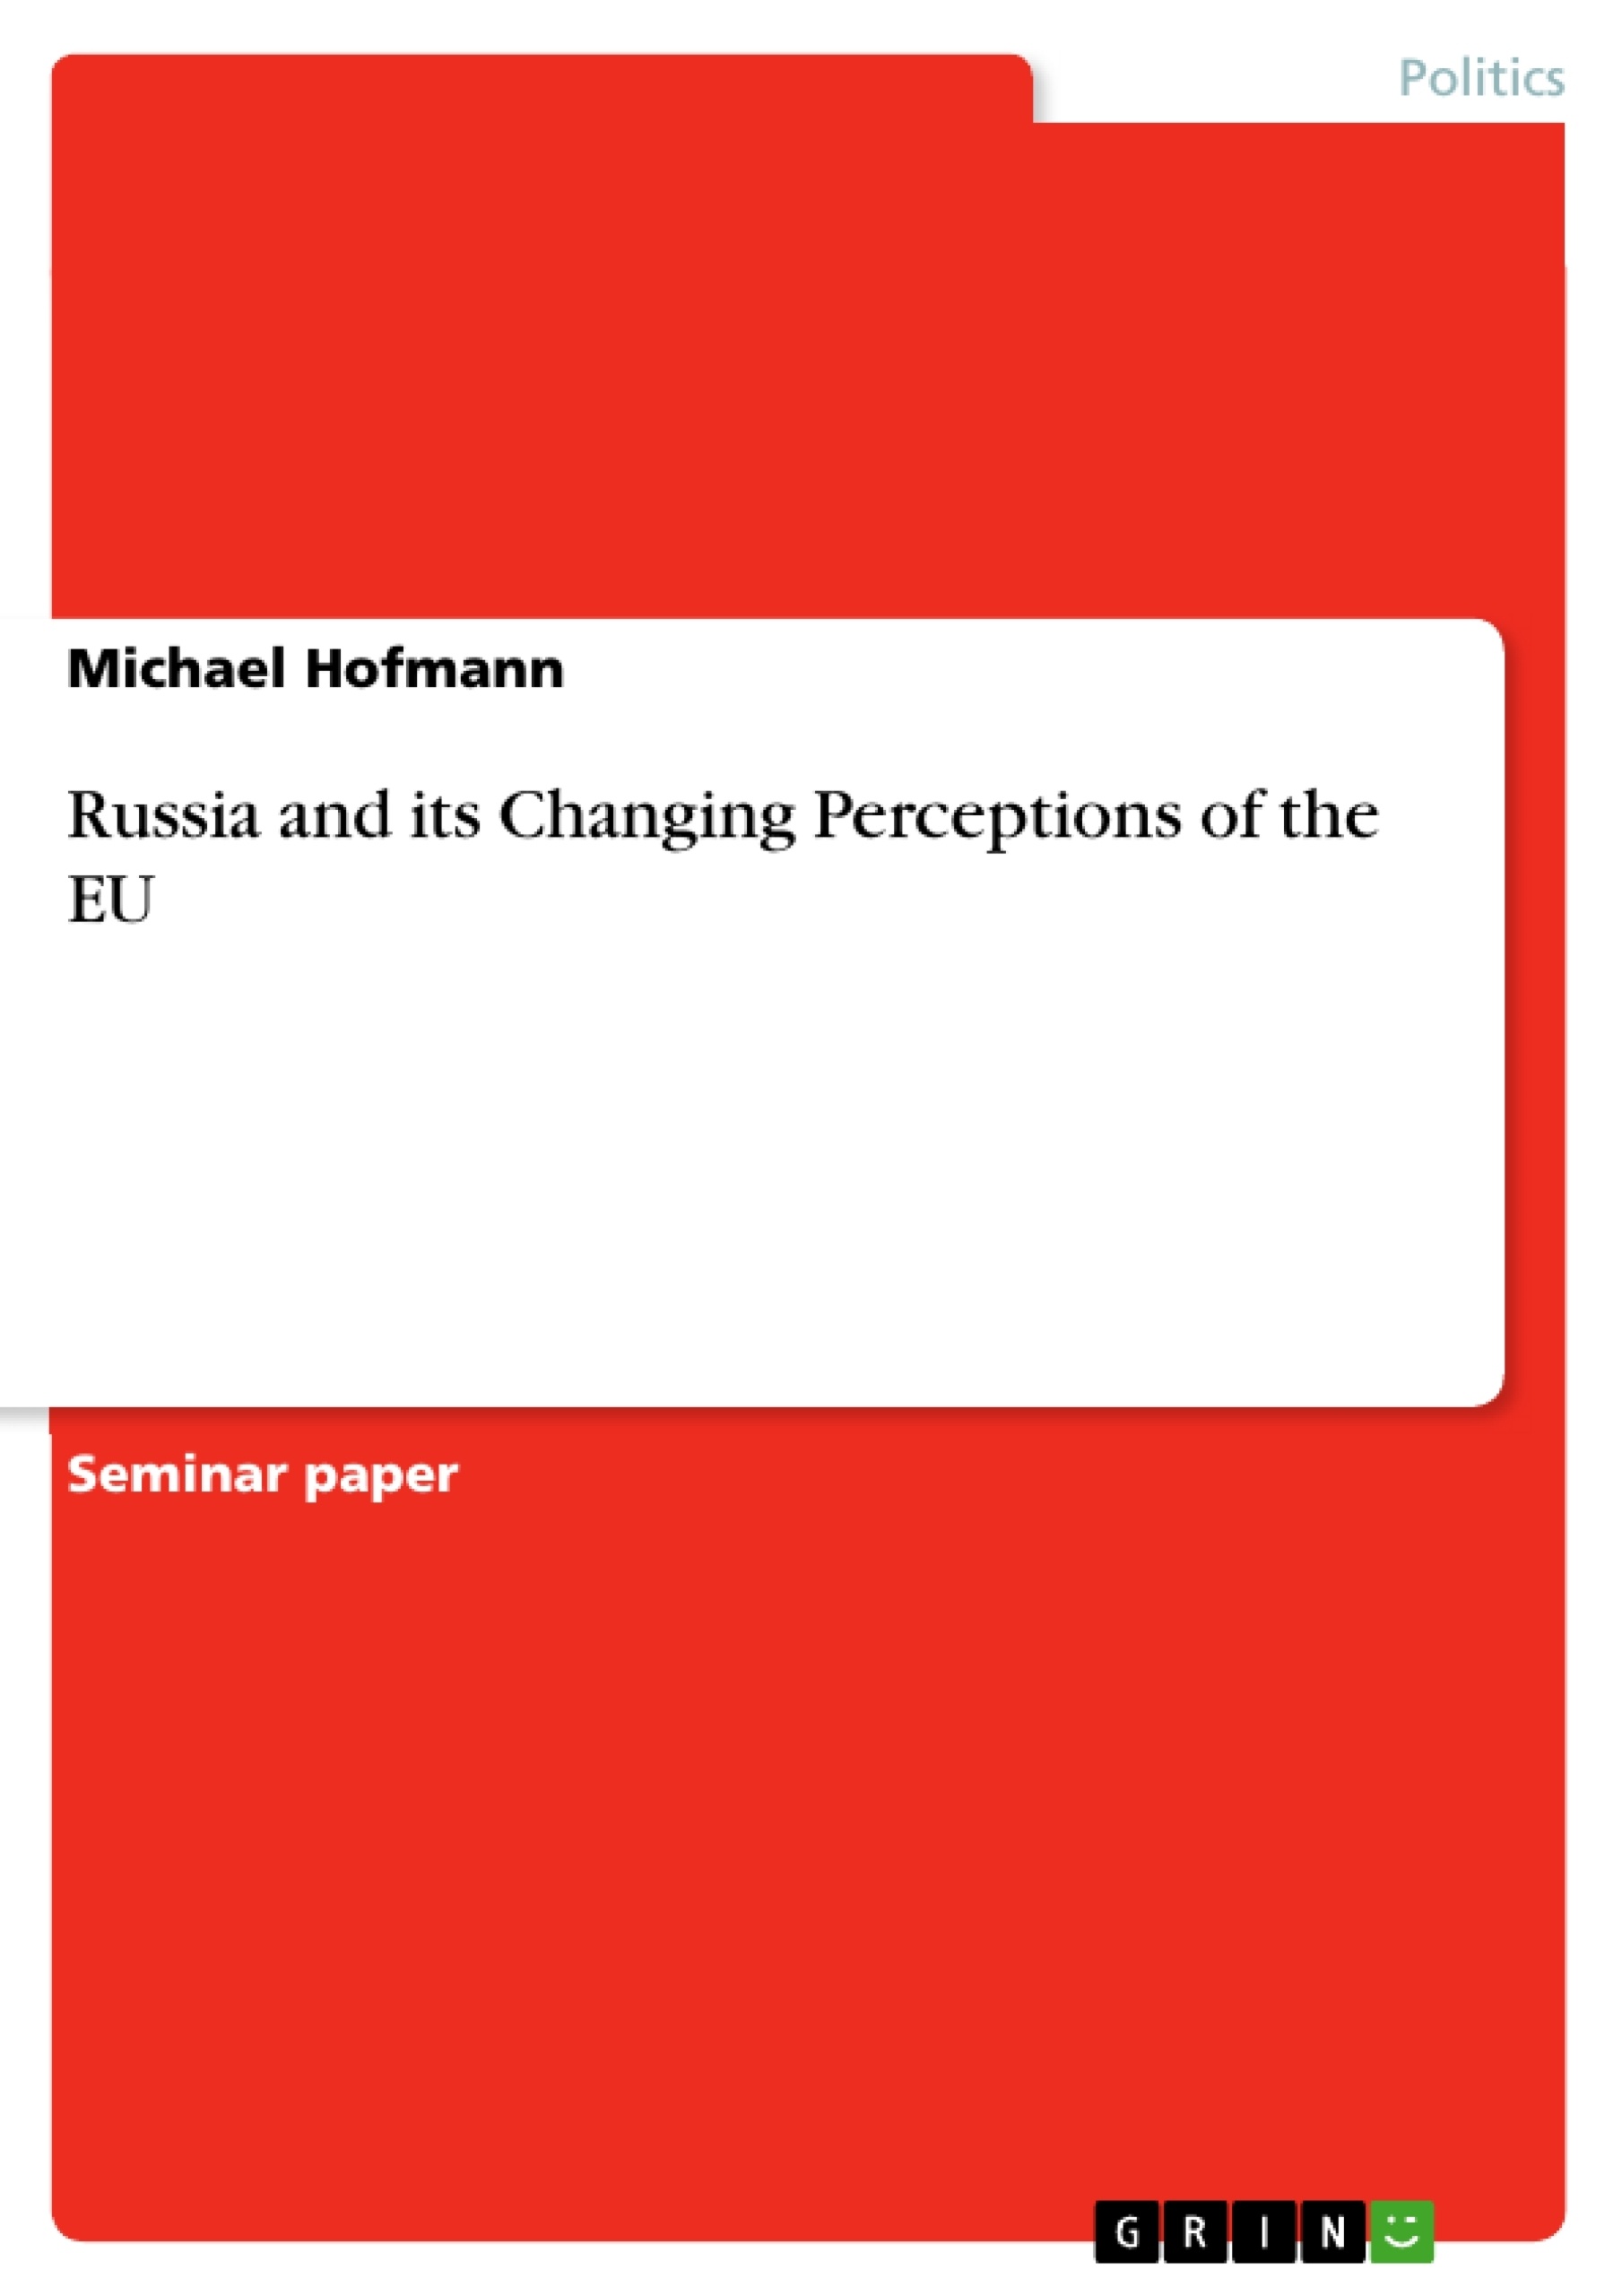 Title: Russia and its Changing Perceptions of the EU